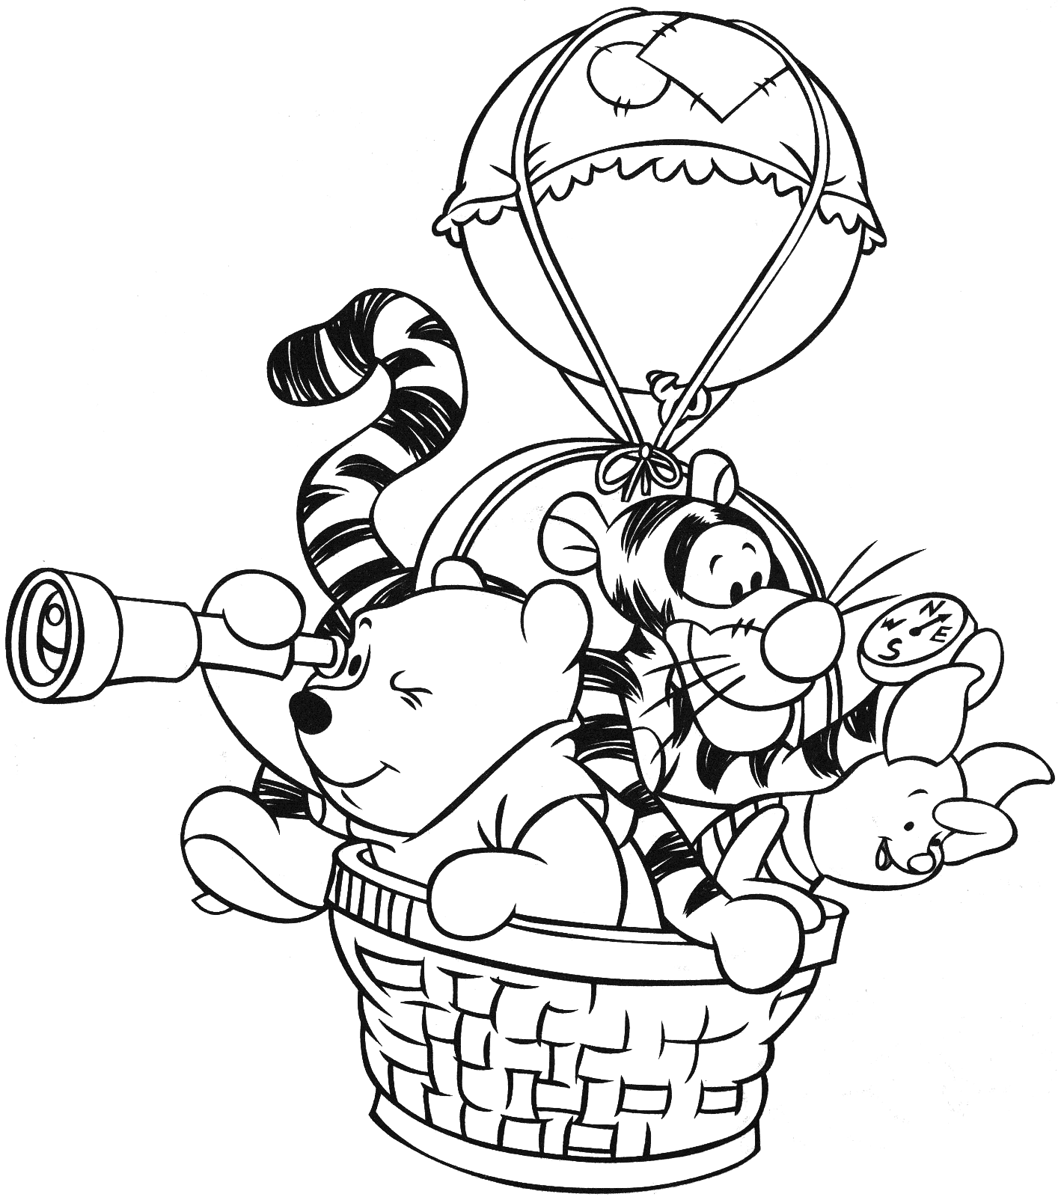 free winnie the pooh coloring sheets winnie the pooh coloring page minister coloring sheets free the coloring winnie pooh 